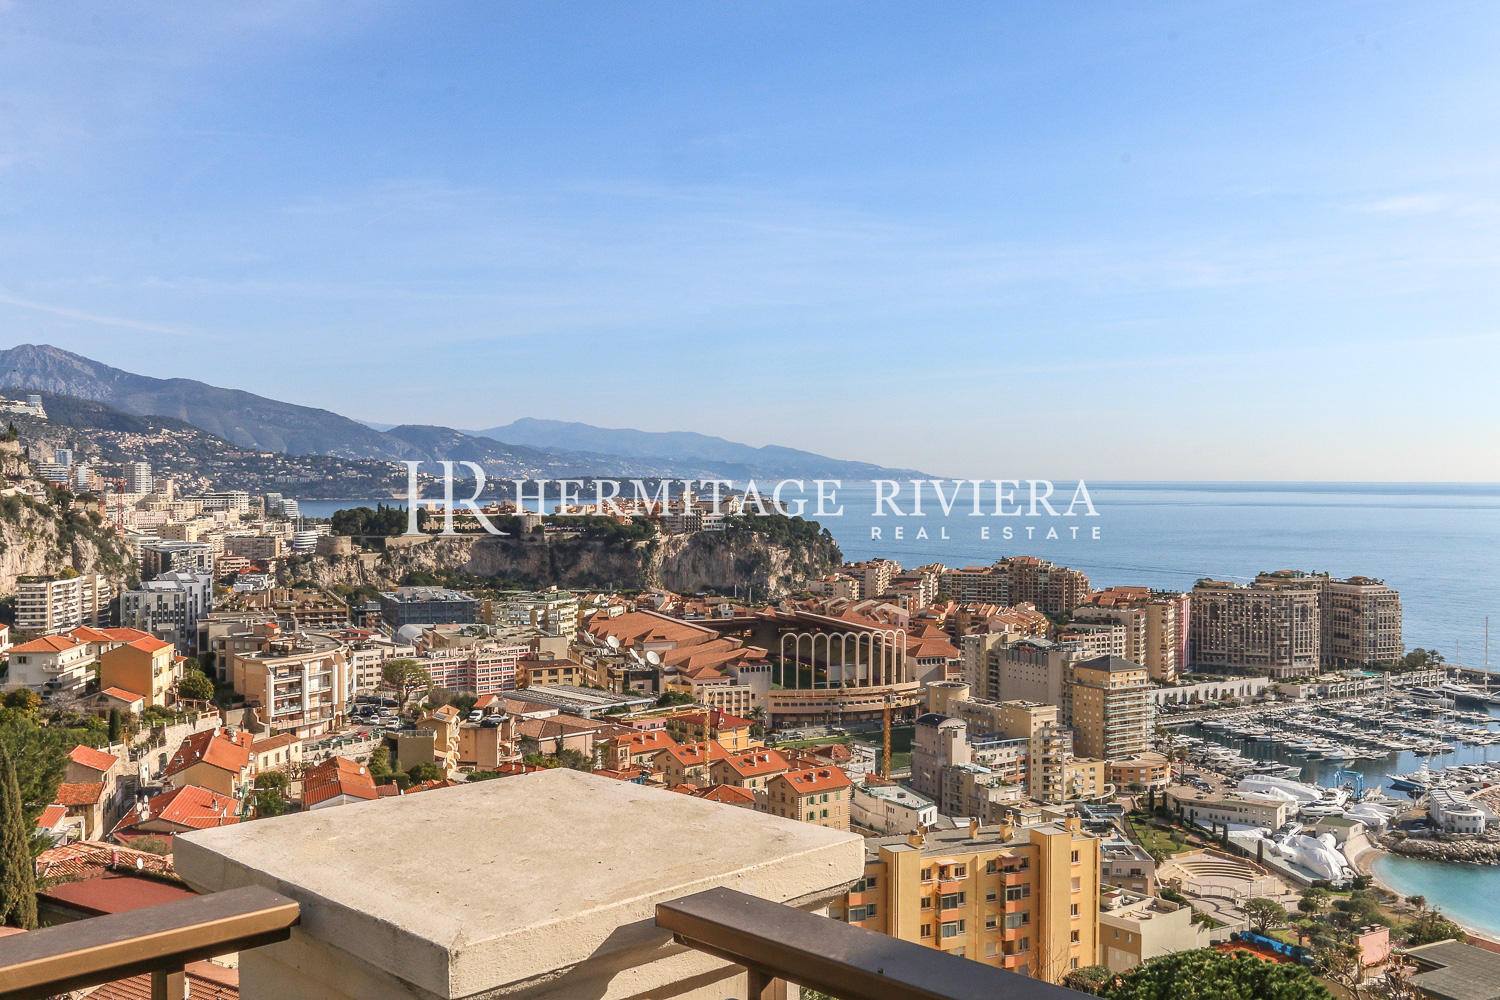 Apartment to renovate with views over Monaco (image 1)